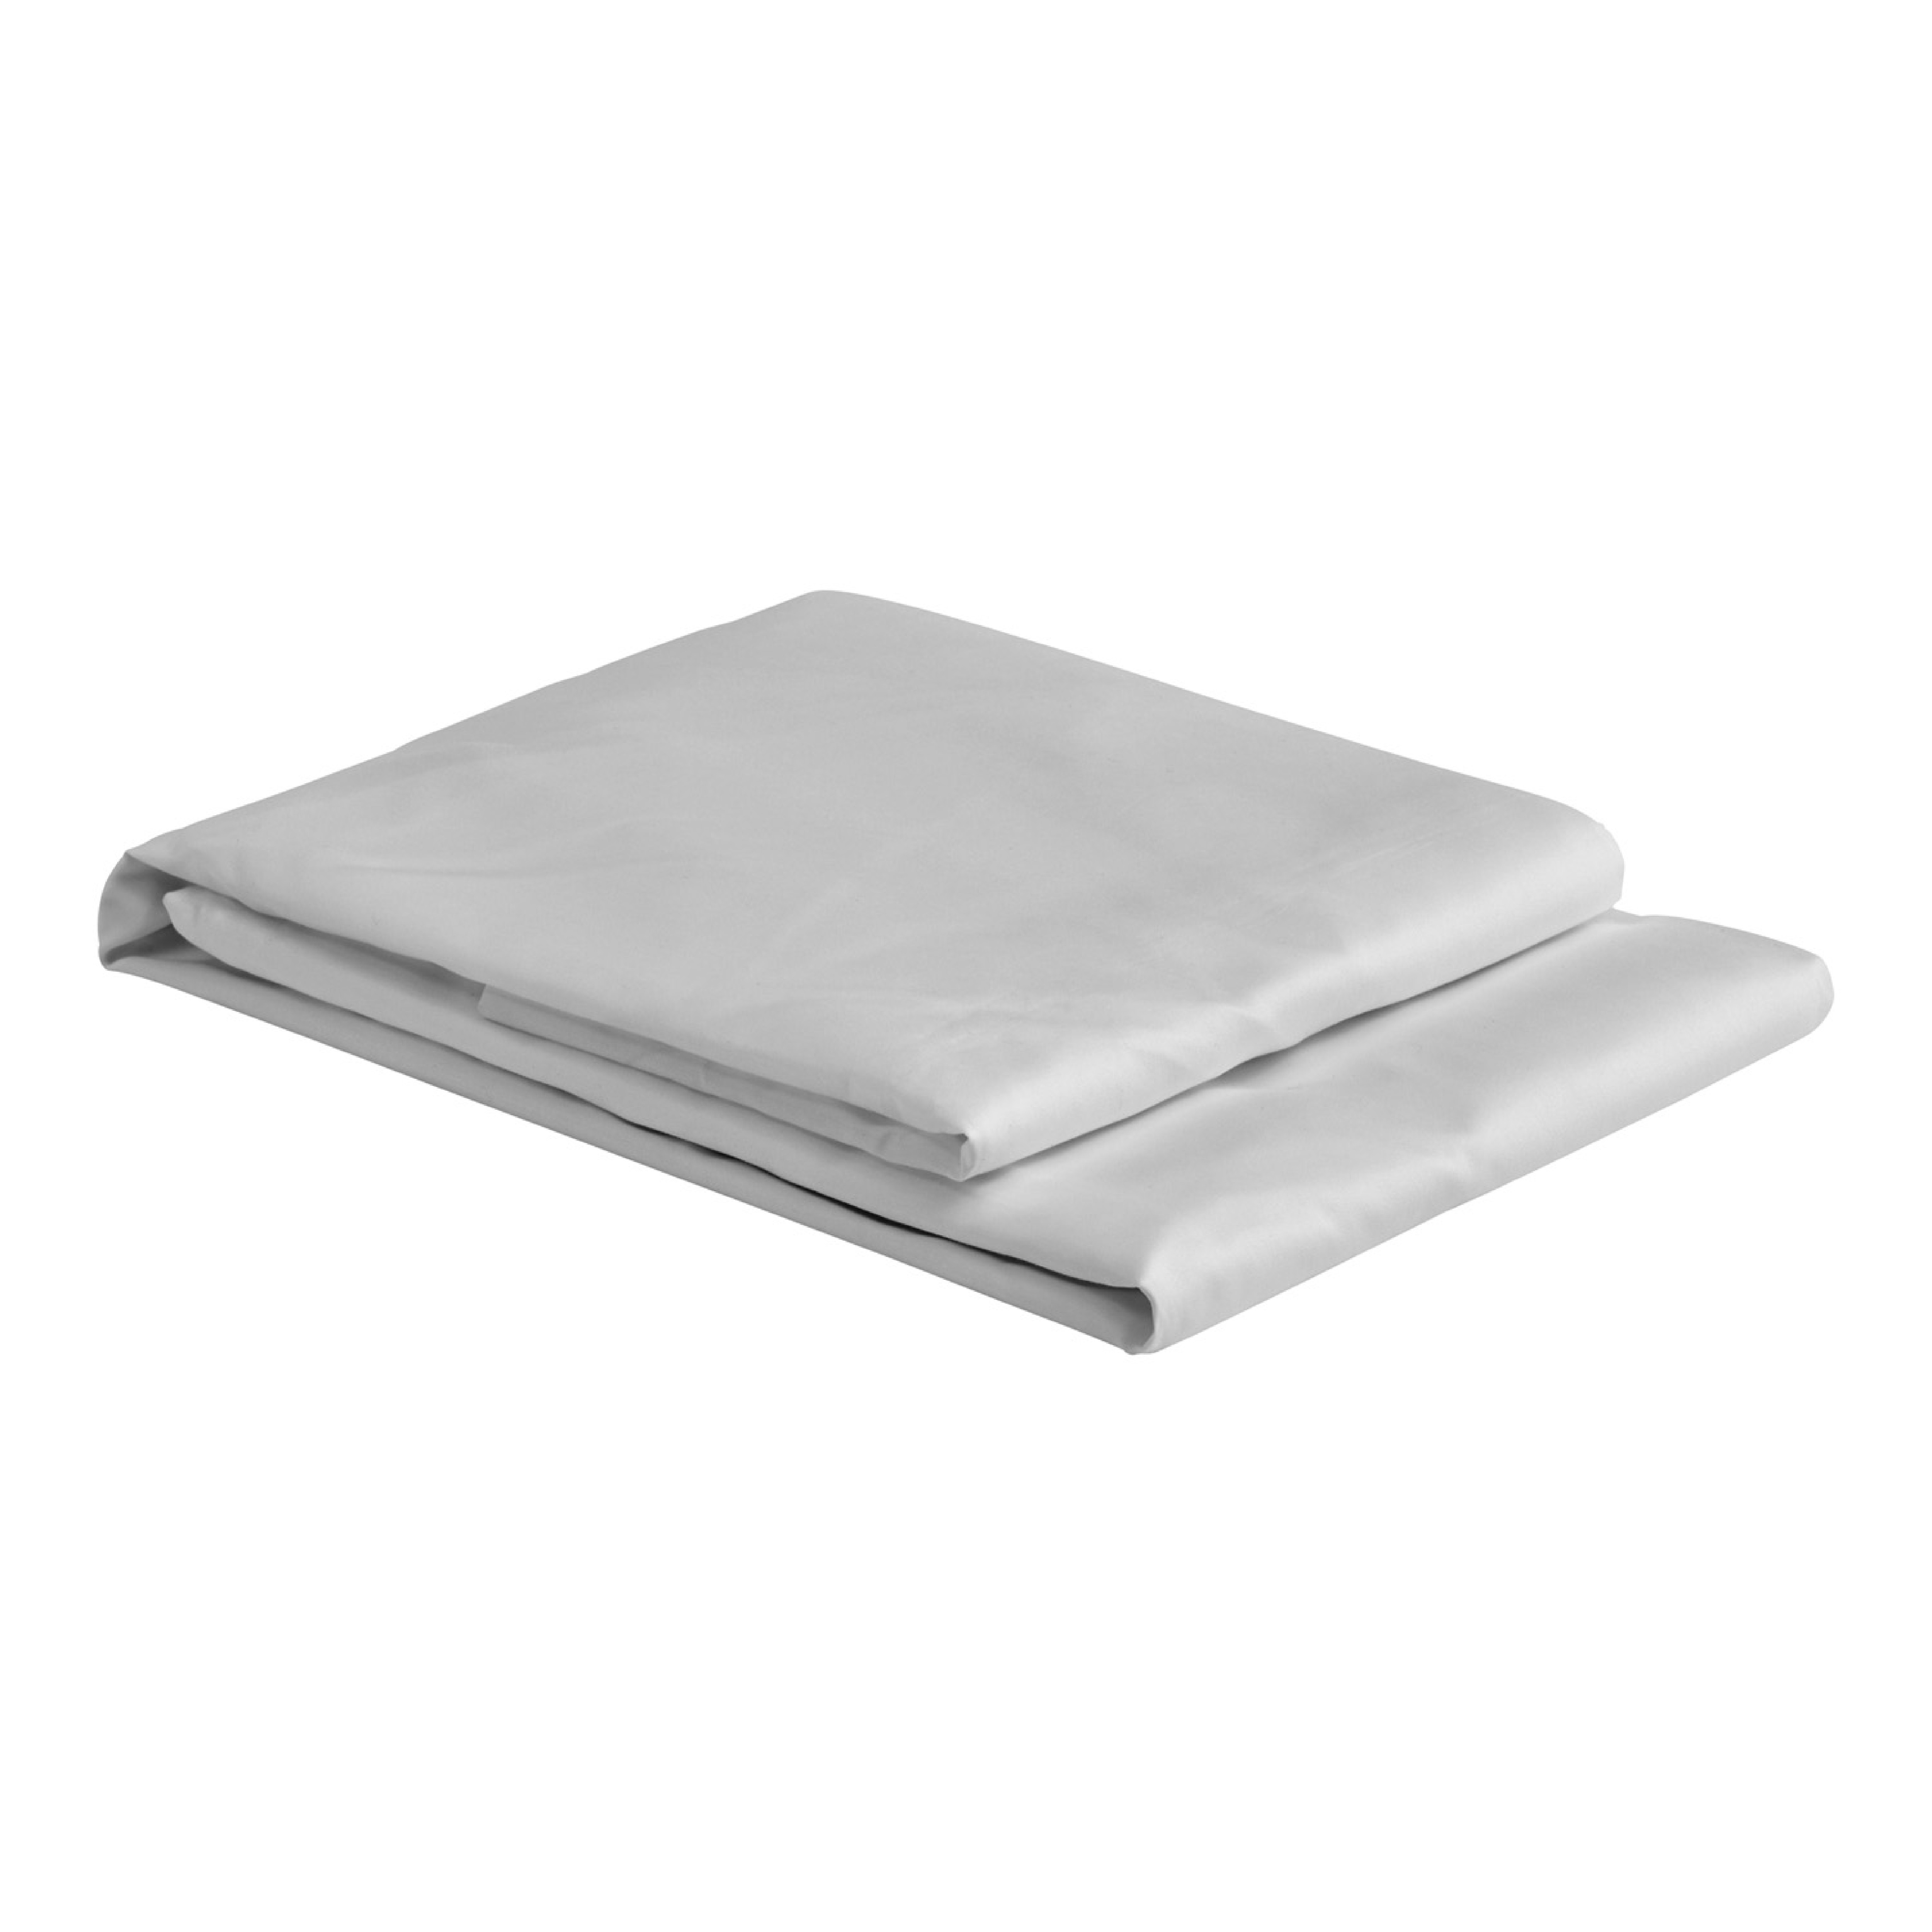 Fitted sheet SATIN UNI 